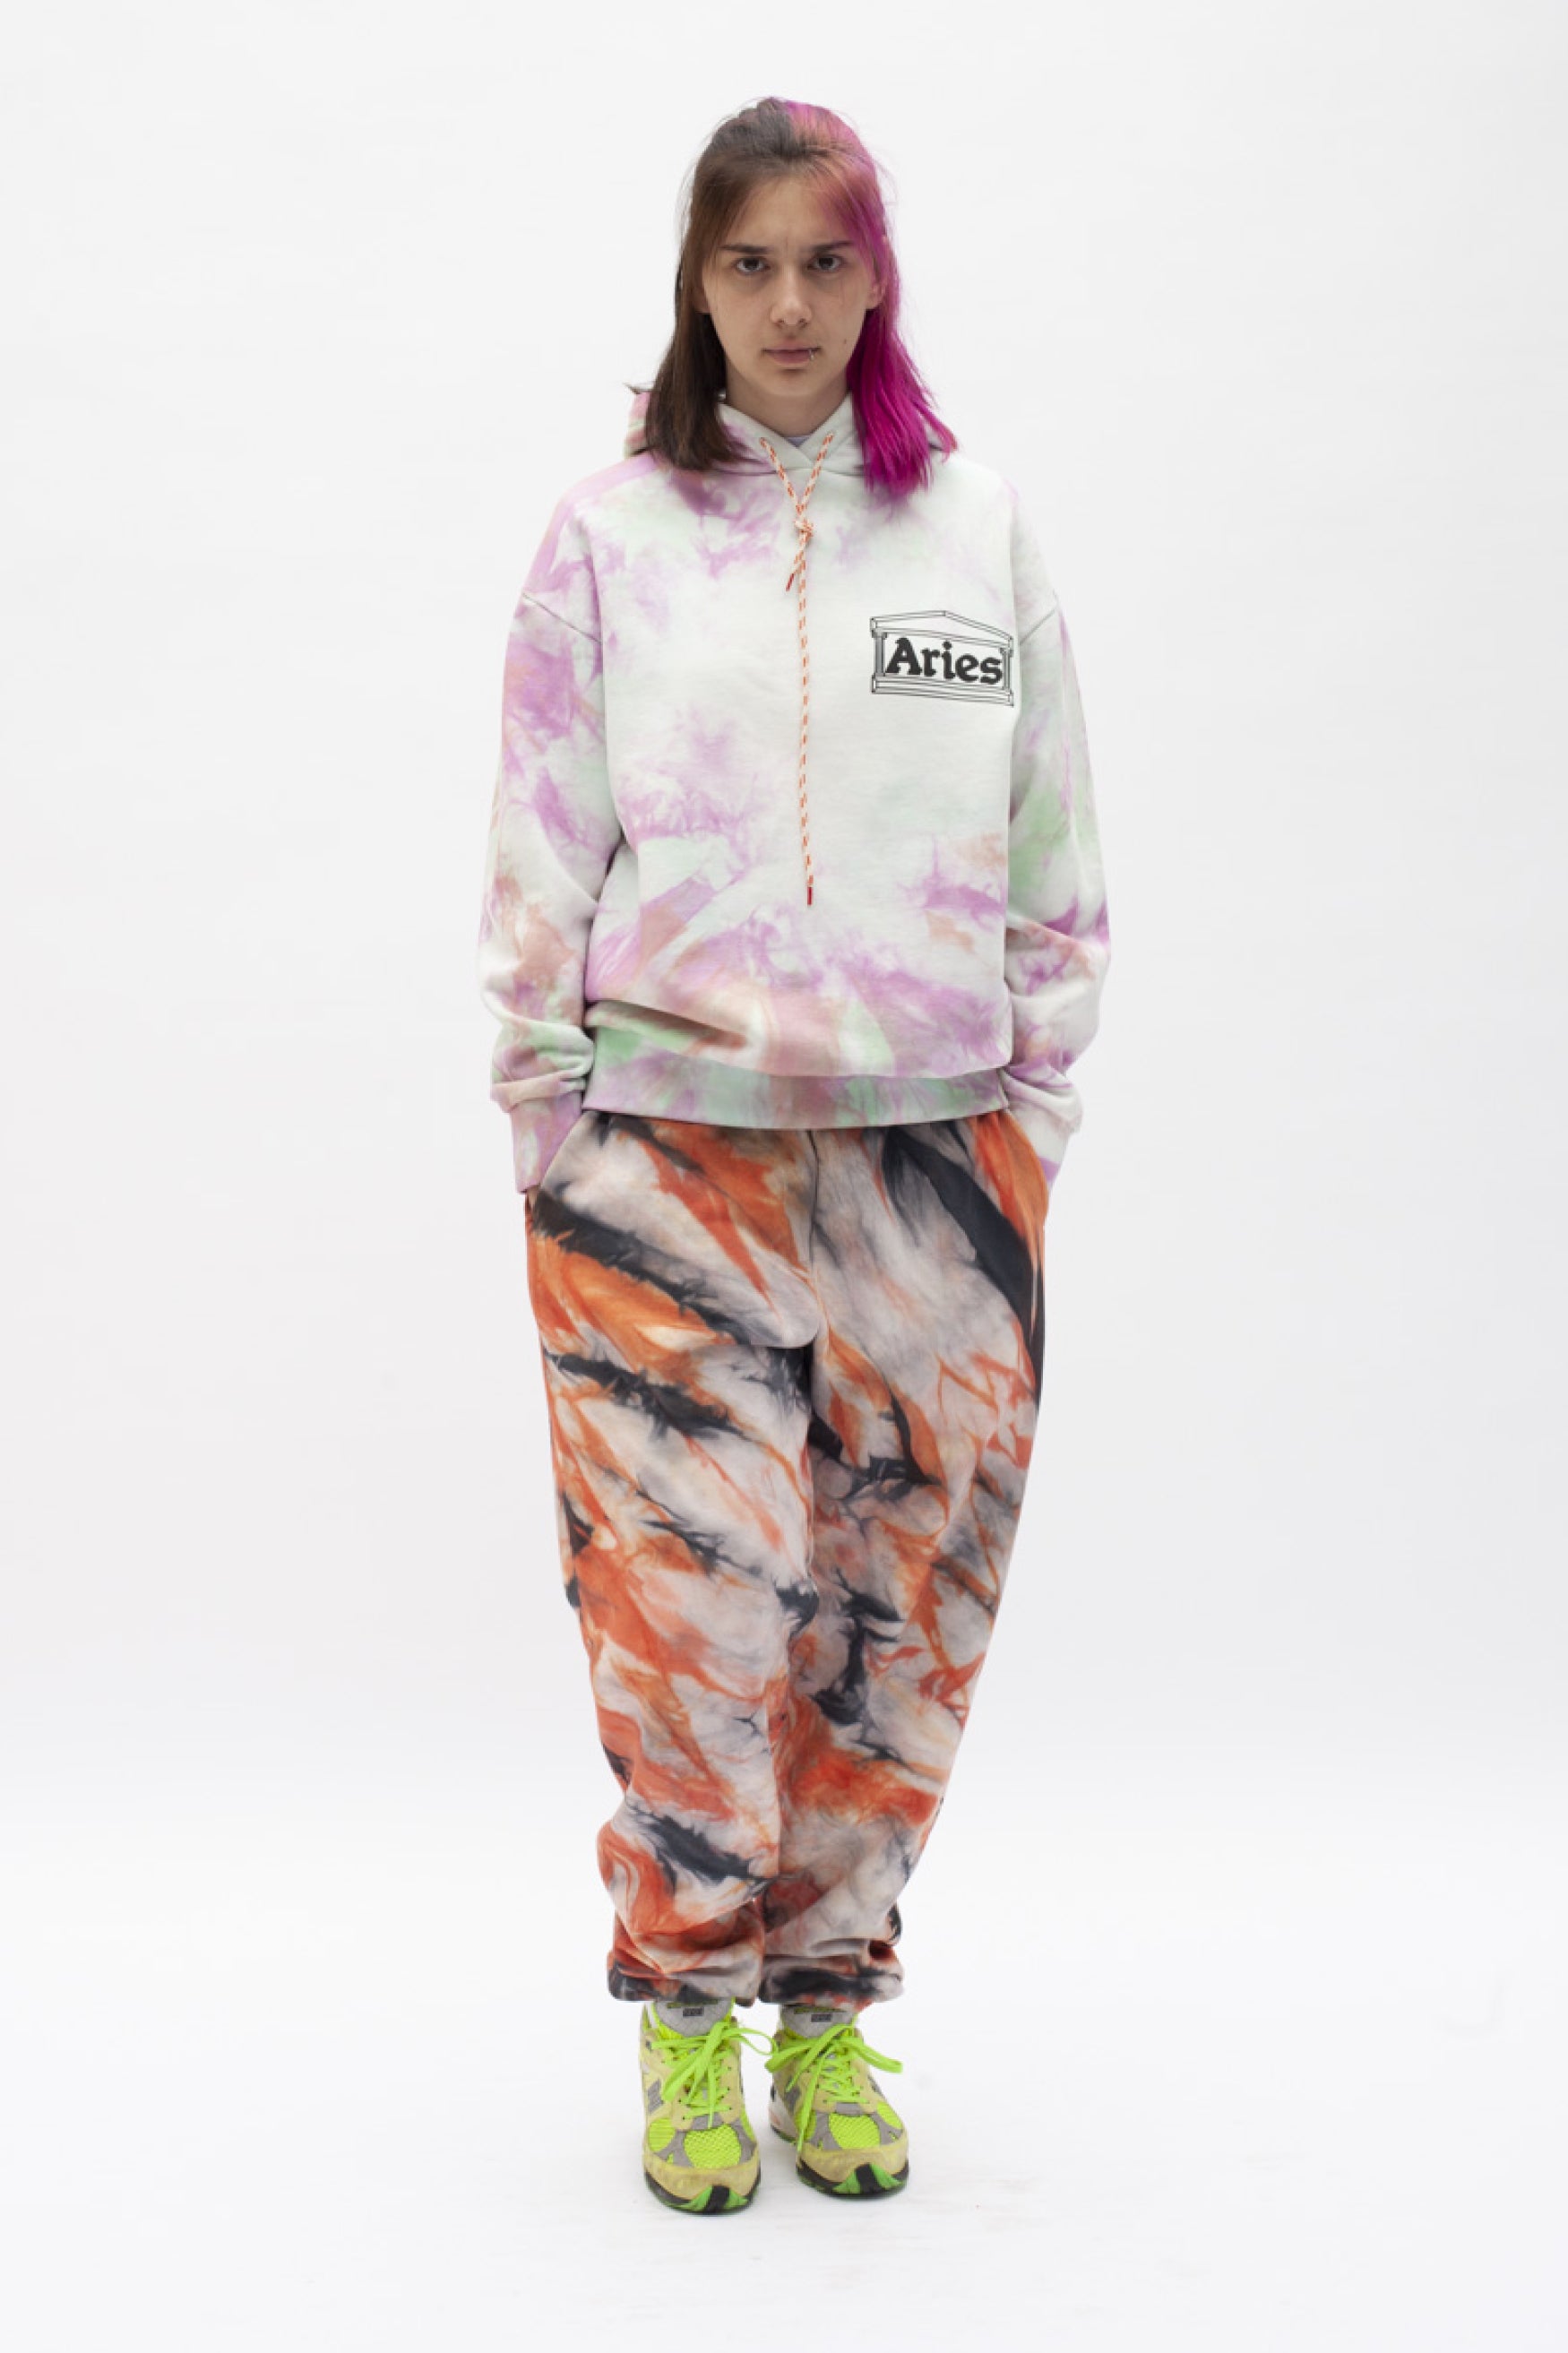 Load image into Gallery viewer, Tiger Dye No Problemo Sweatpant